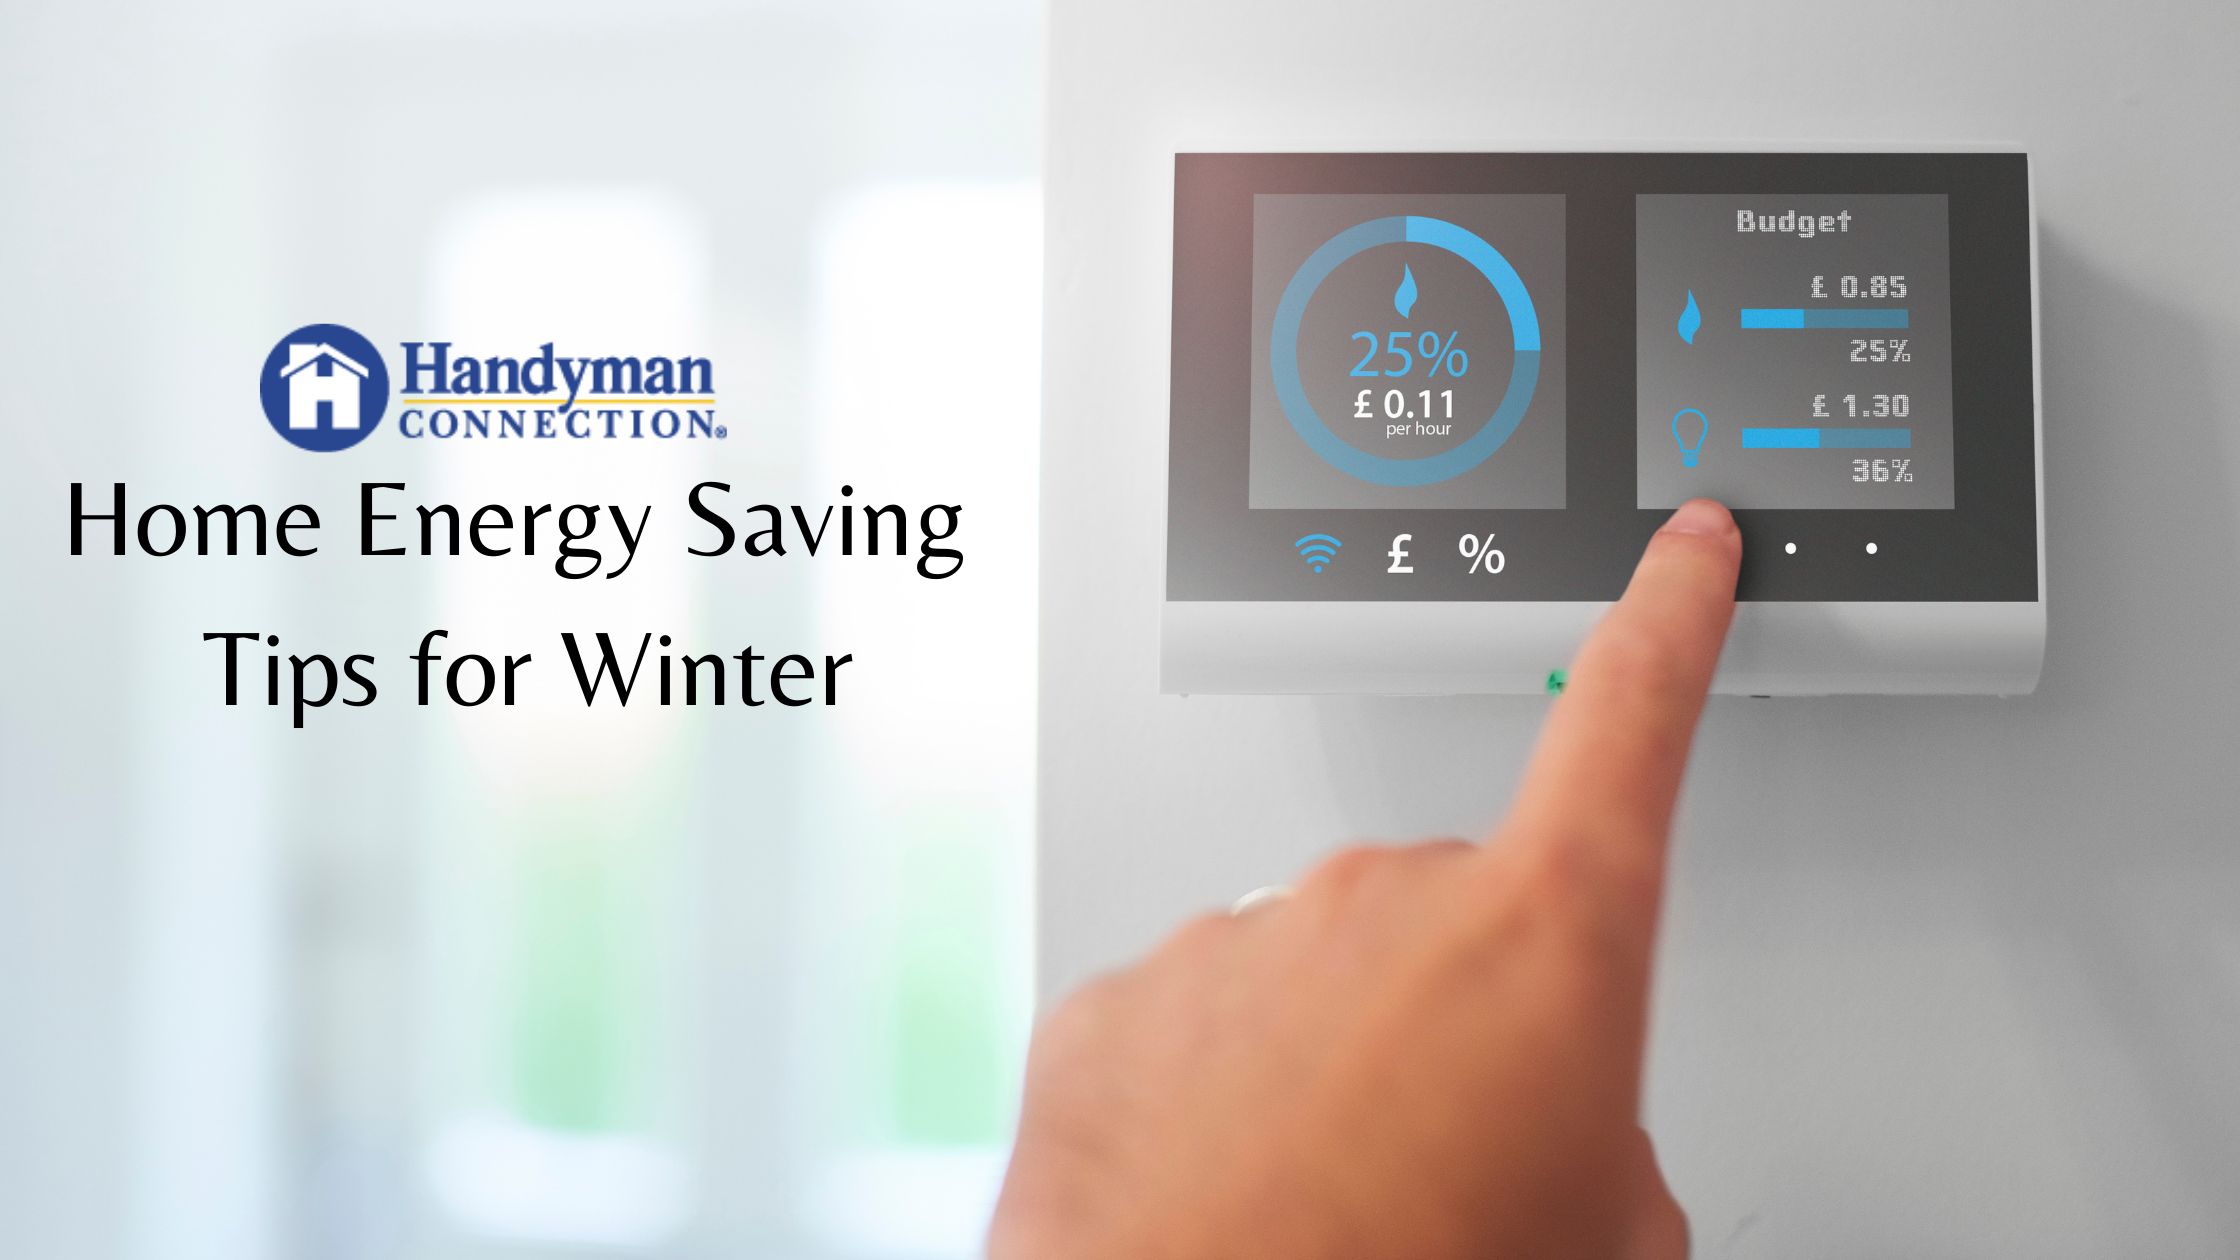 https://handymanconnection.com/wp-content/uploads/2021/05/Home-Energy-Saving-Tips-for-Winter.png